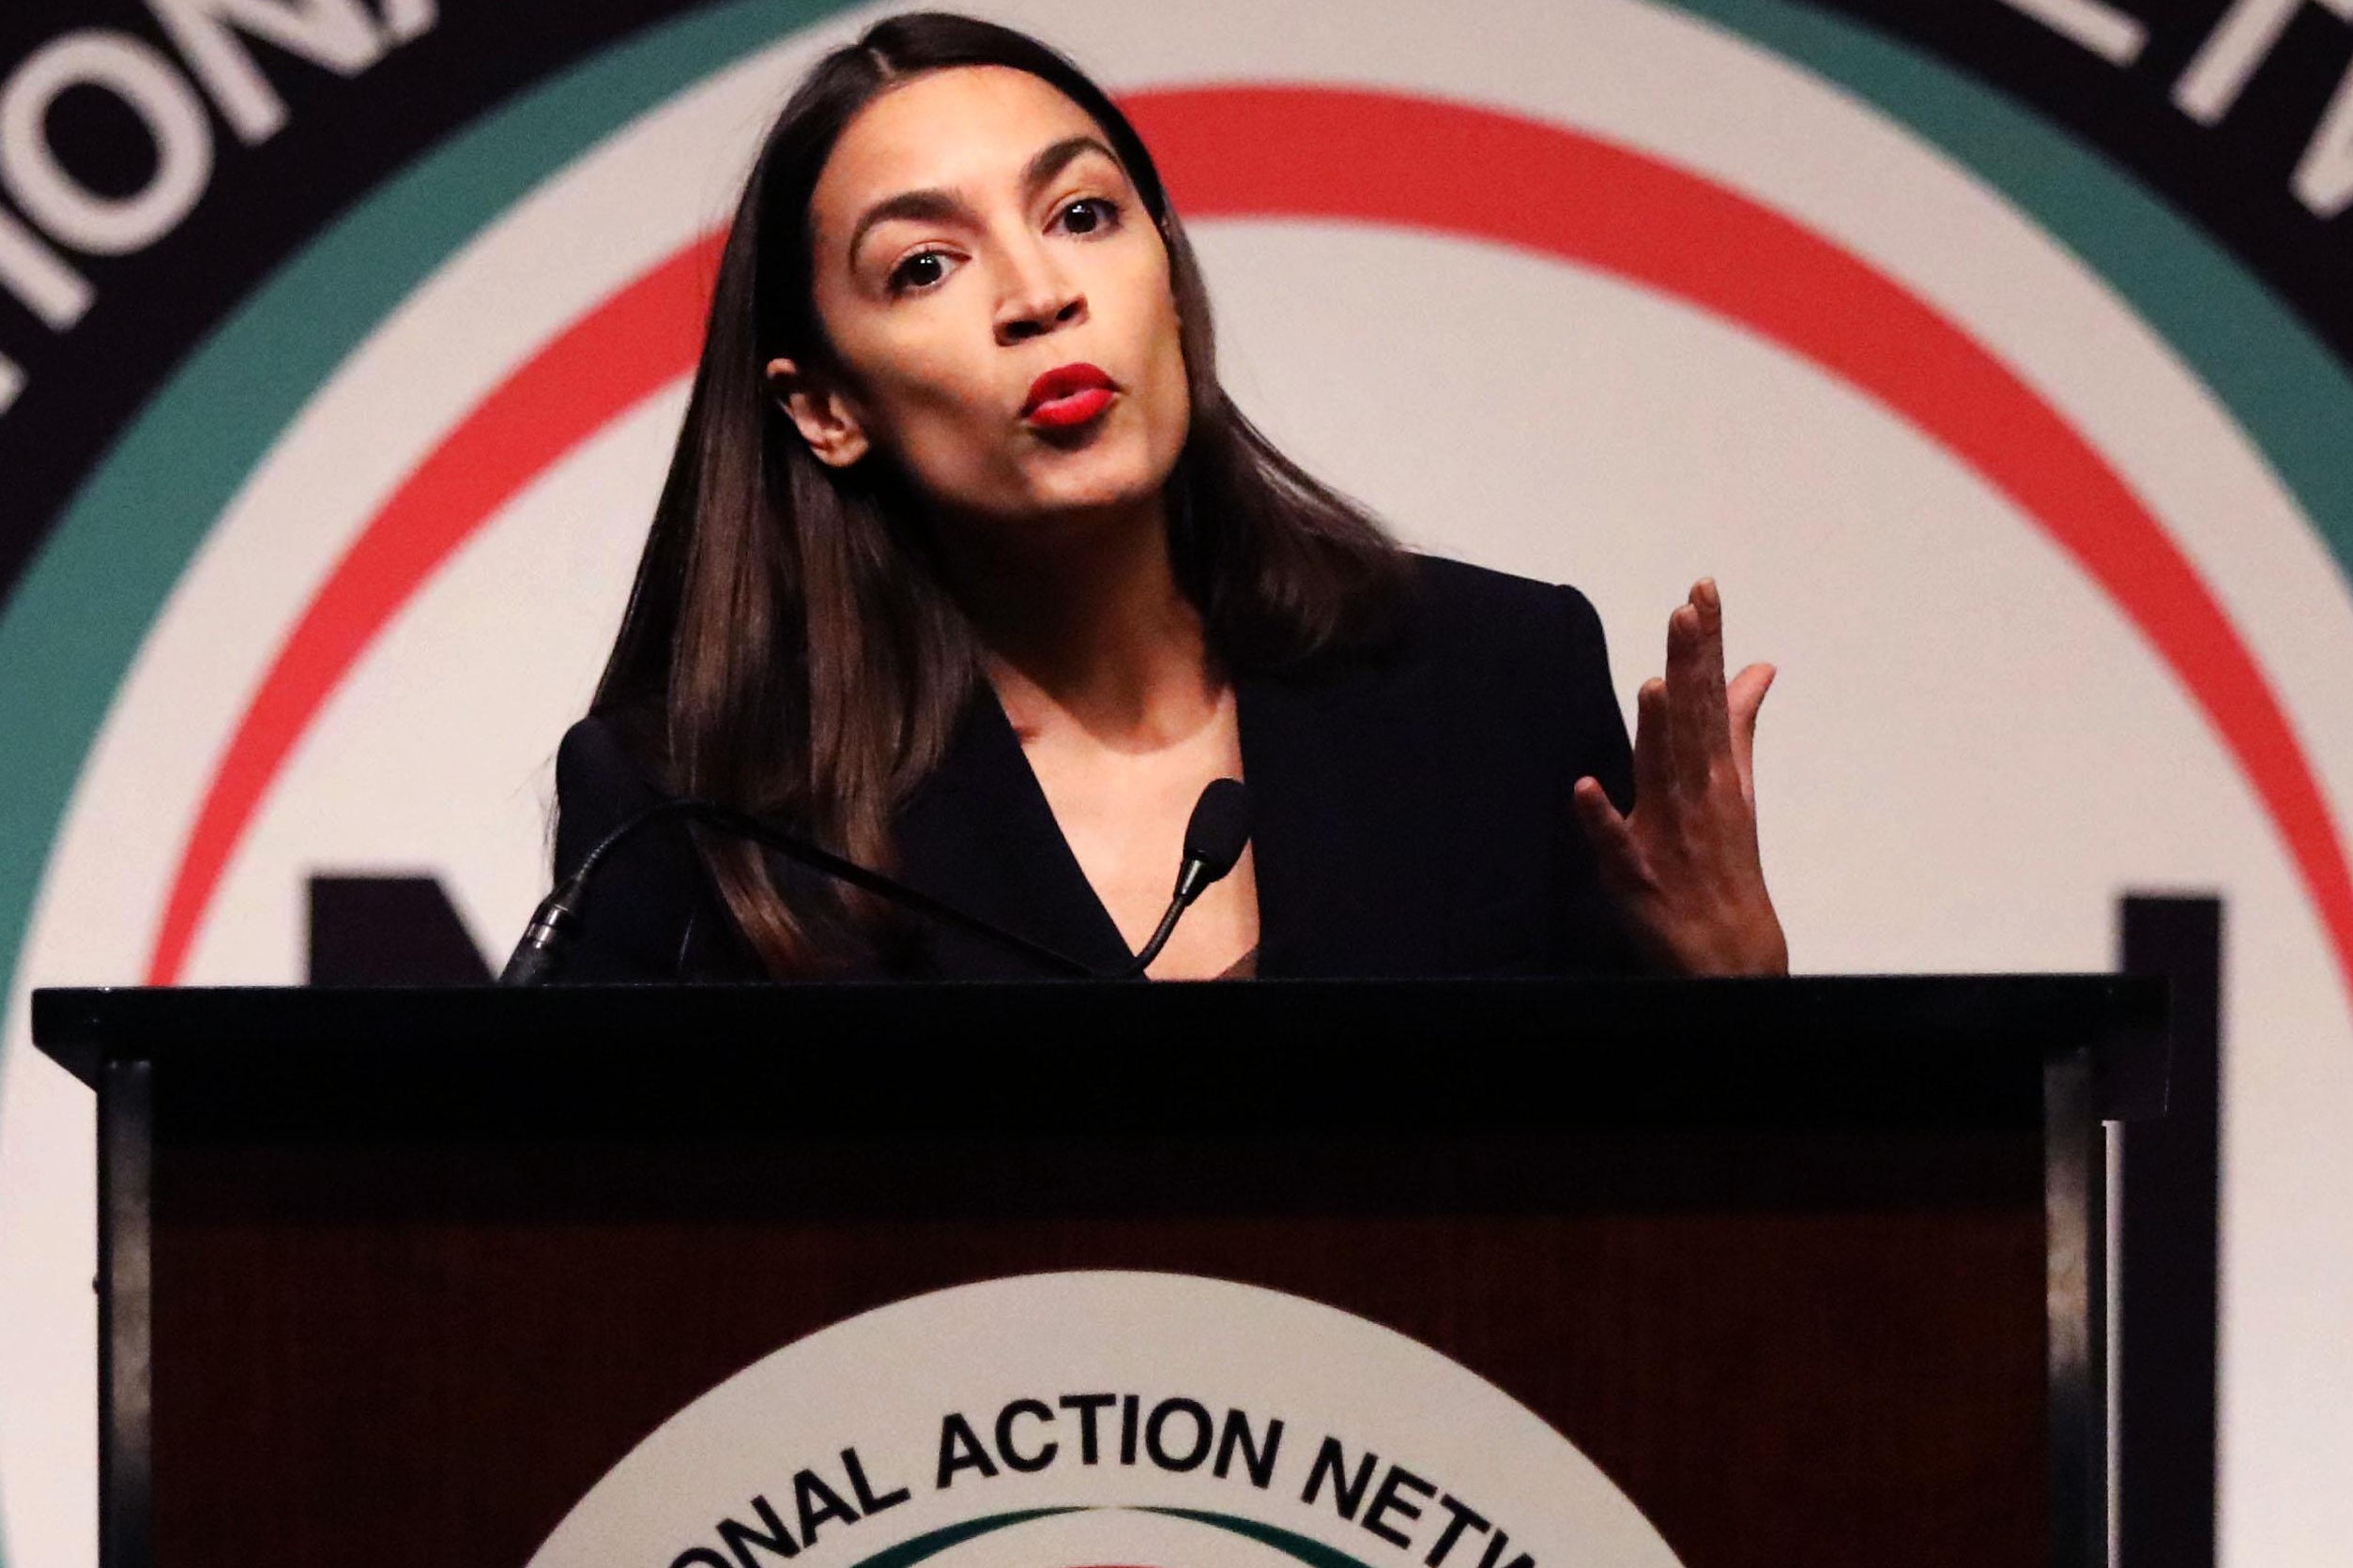 Rep. Alexandria Ocasio-Cortez (D-NY) speaks at the National Action Network’s annual convention on April 5, 2019 in New York City.